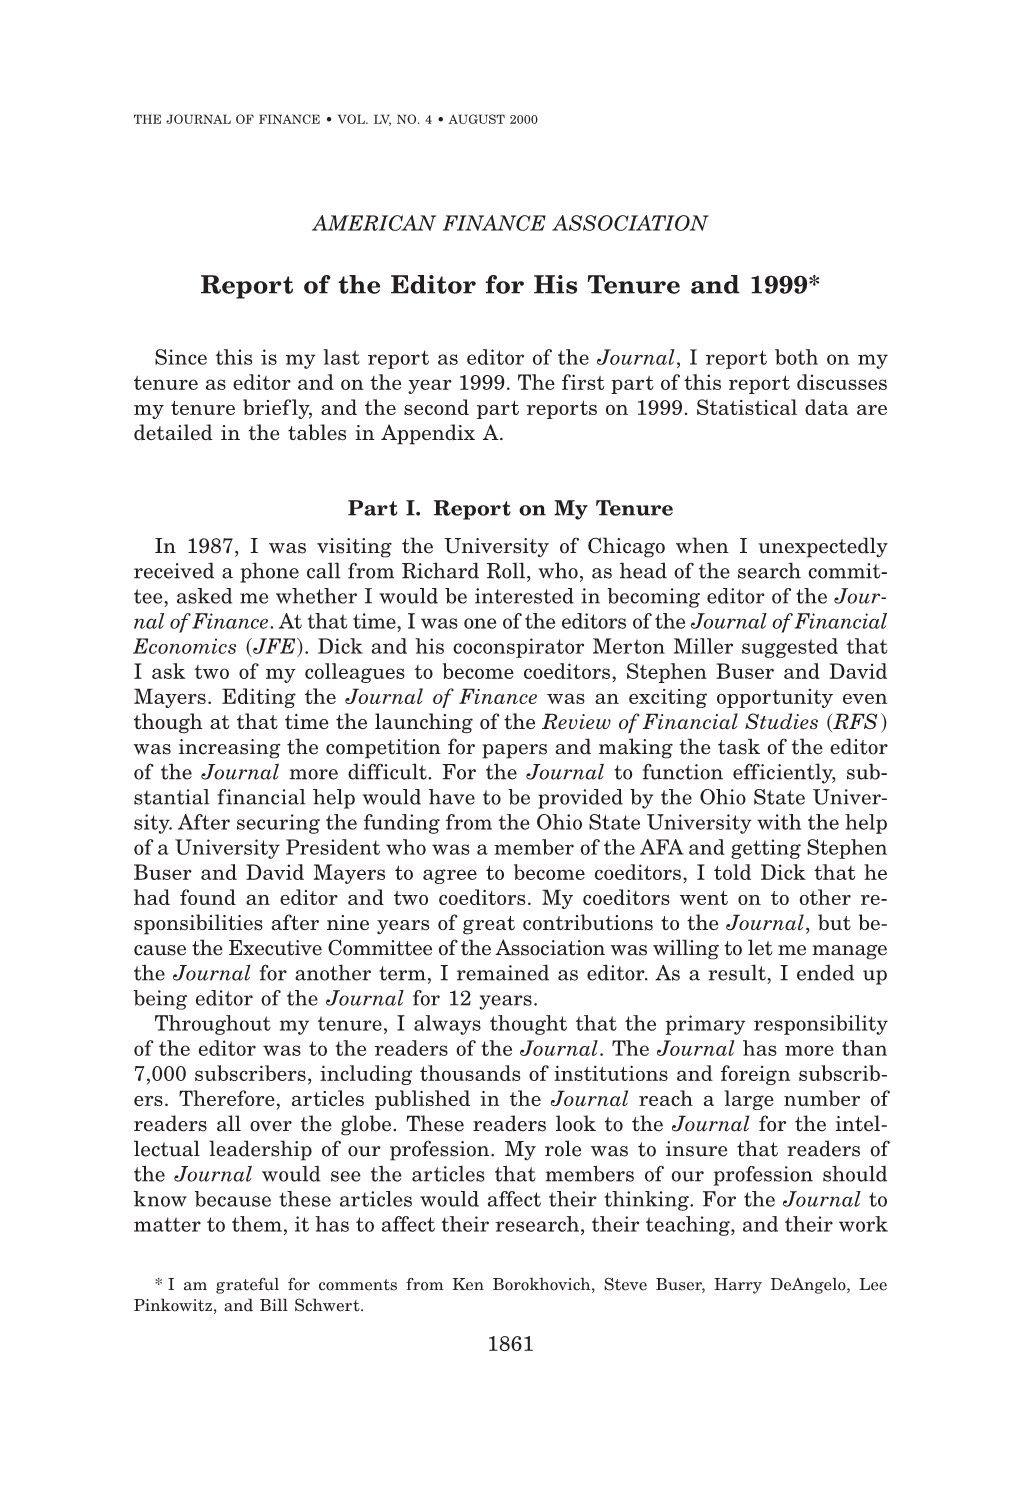 Report of the Editor for His Tenure and 1999*